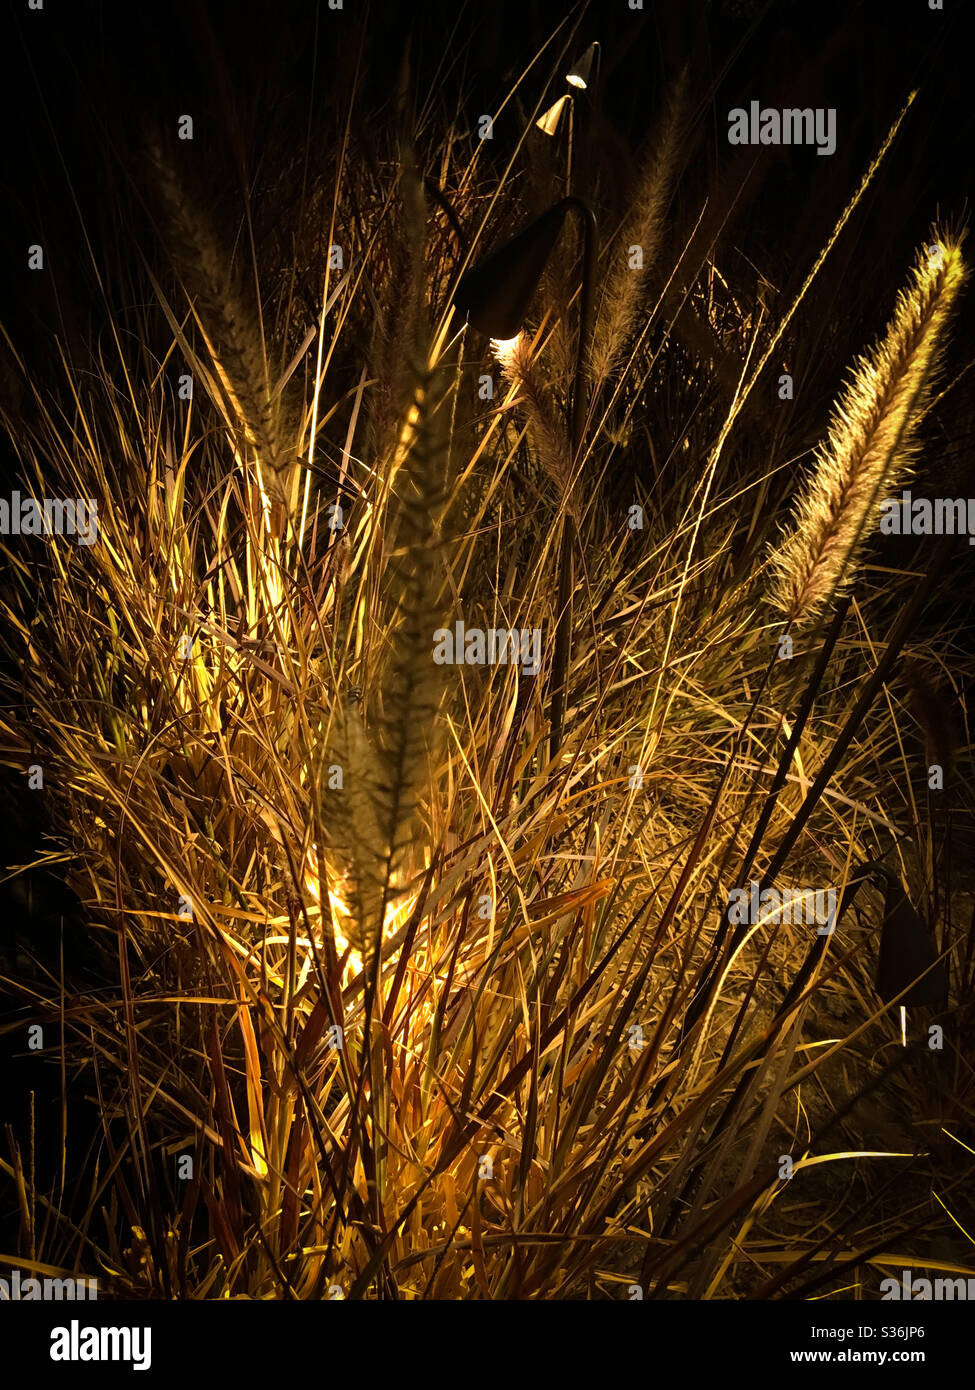 hay creatively used as a decoration by adding lights in Shaheed Park, Kuwait City Stock Photo